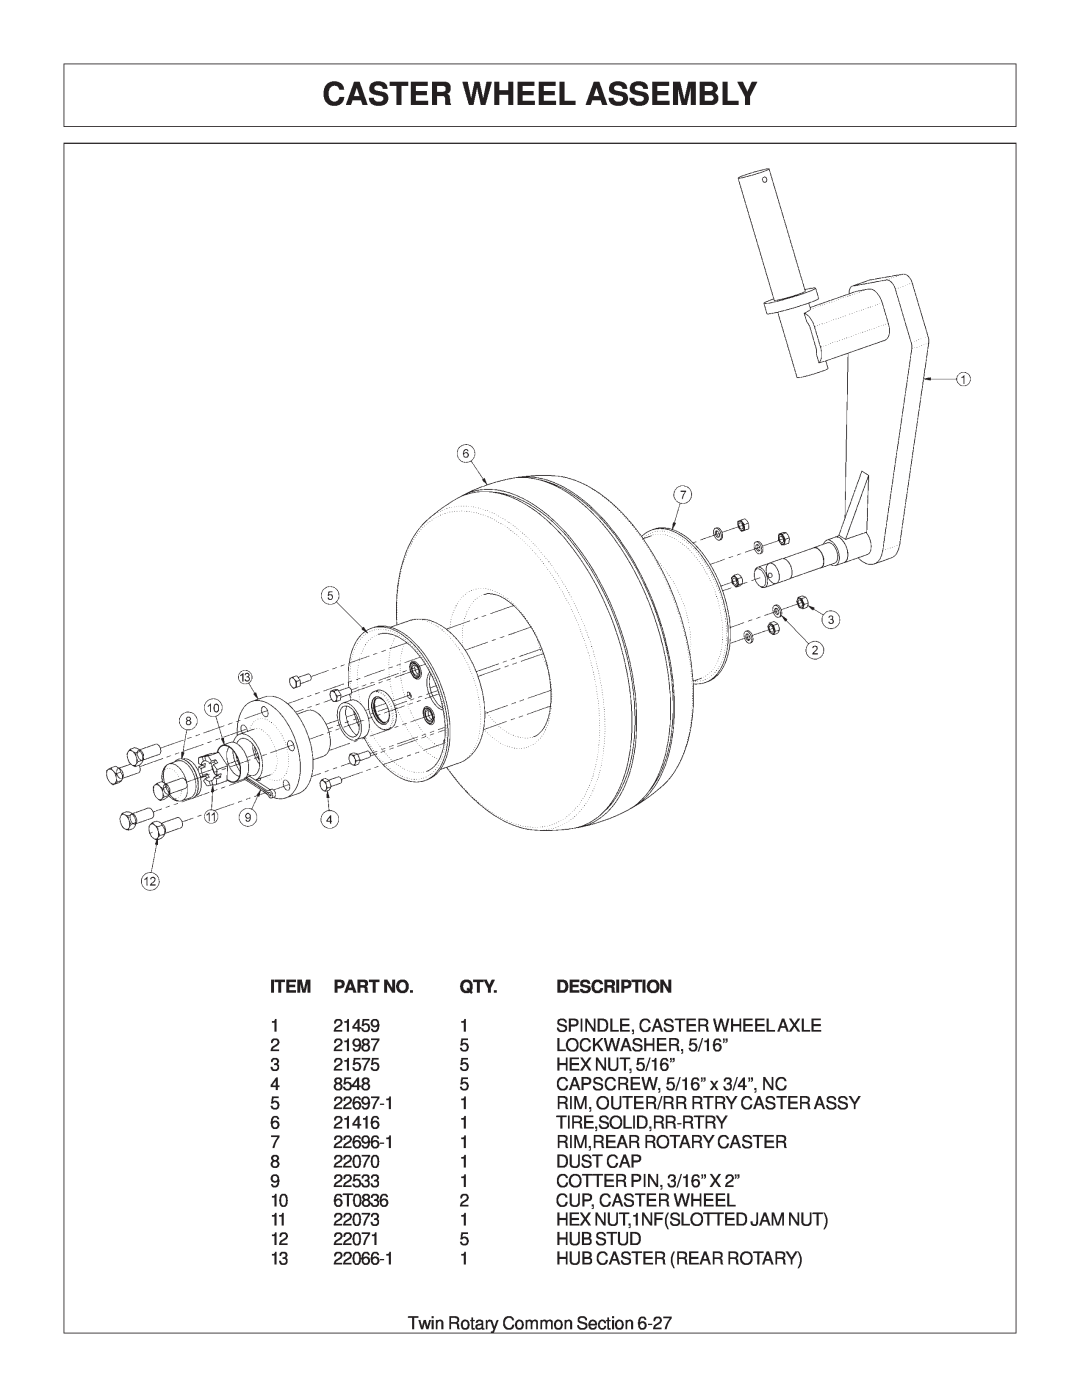 Tiger Products Co., Ltd 6020009 manual Caster Wheel Assembly, Description, Rim, Outer/Rr Rtry Caster Assy 